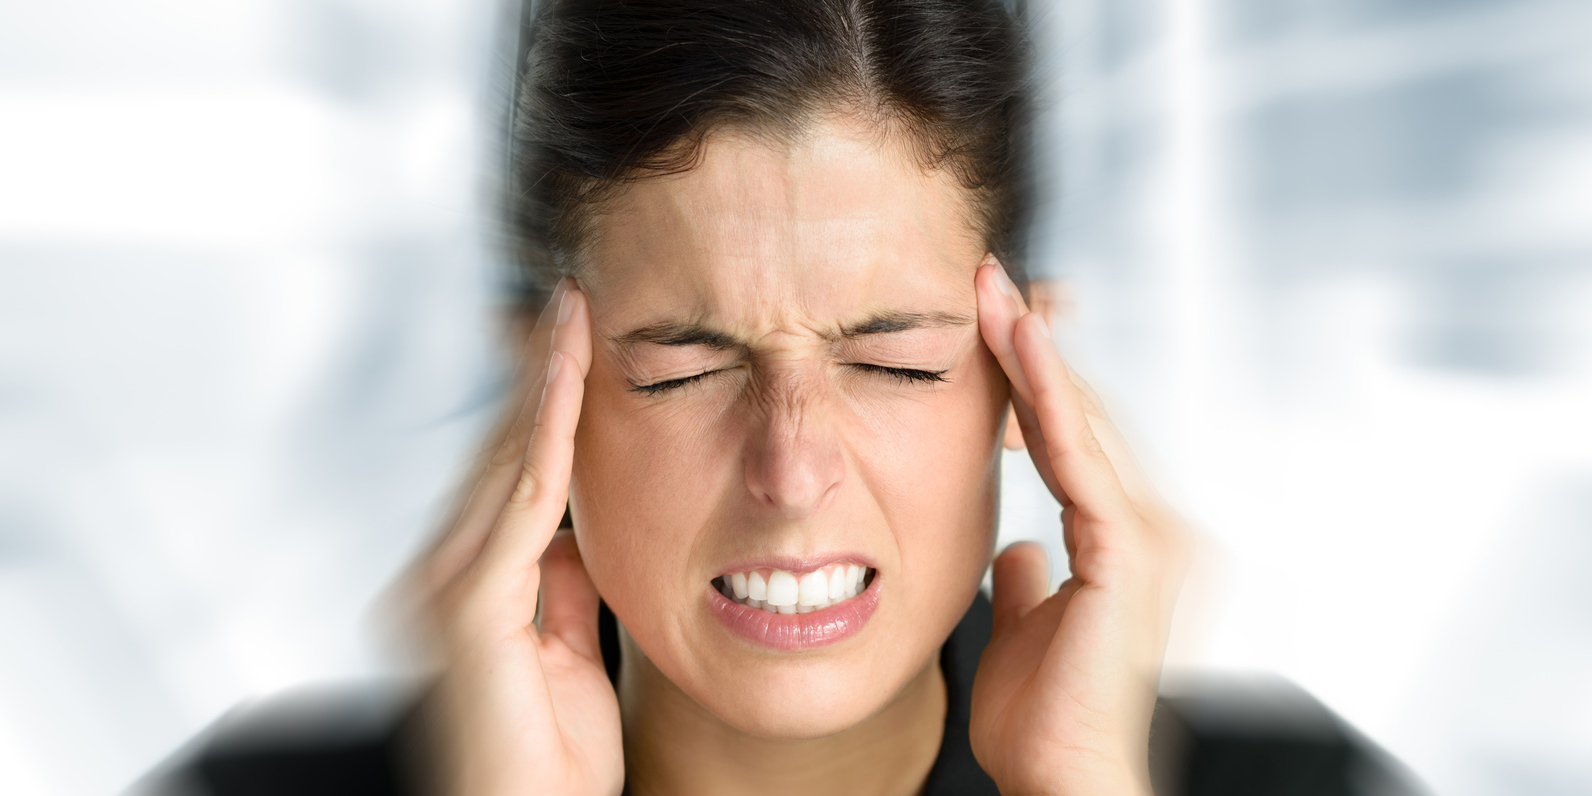 By ICIM member Rindie Coker, DN: Natural healthcare and headaches